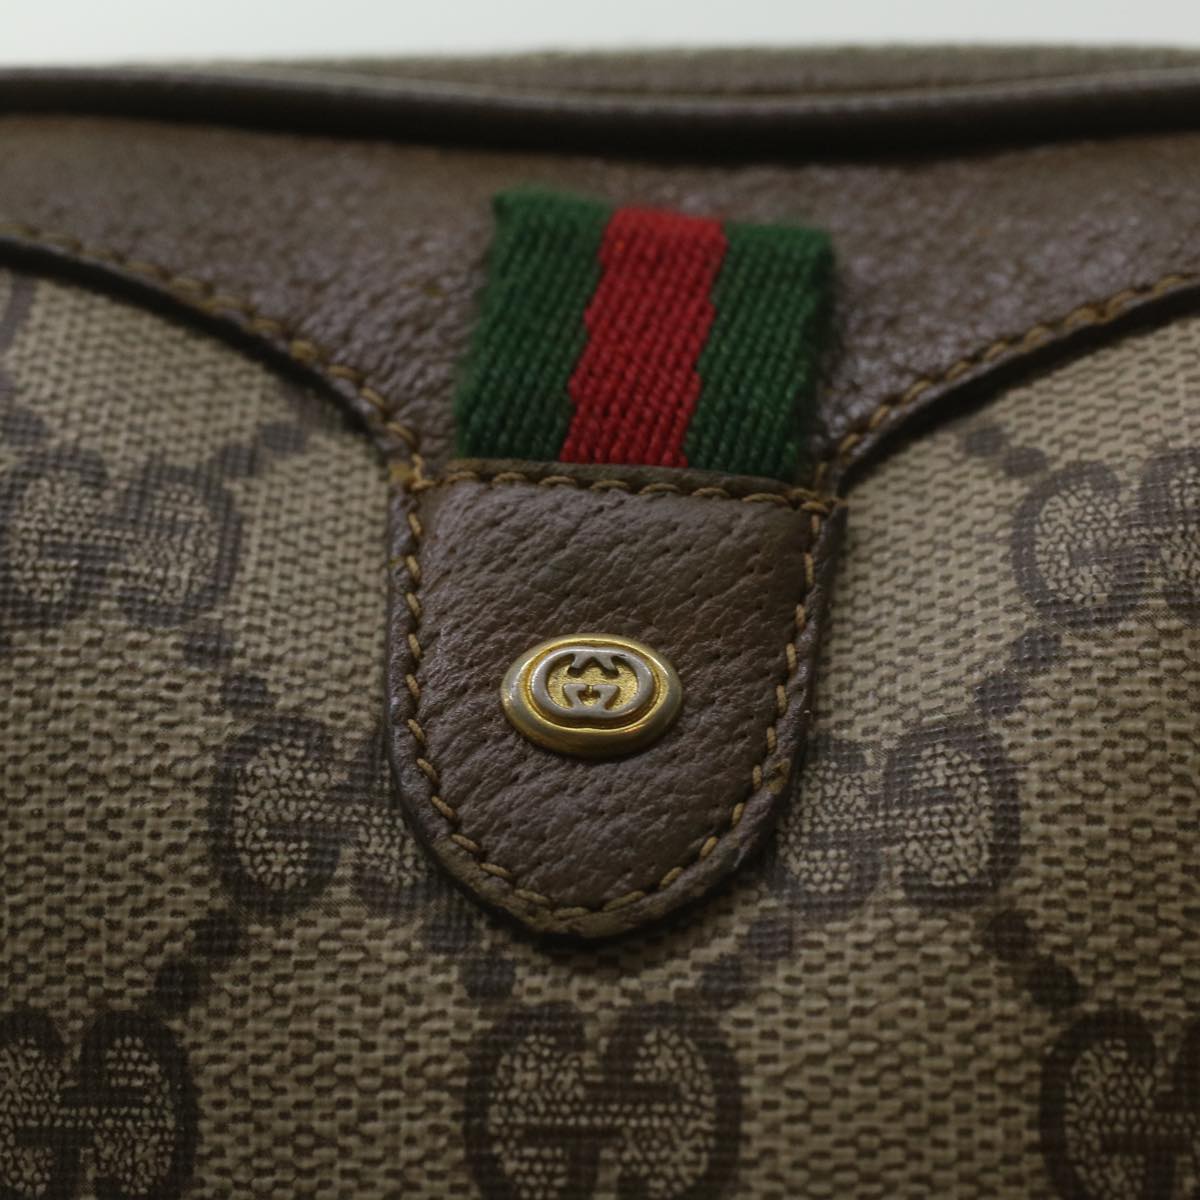 GUCCI GG Canvas Web Sherry Line Shoulder Bag Beige Red 89.02.066 Auth 37720